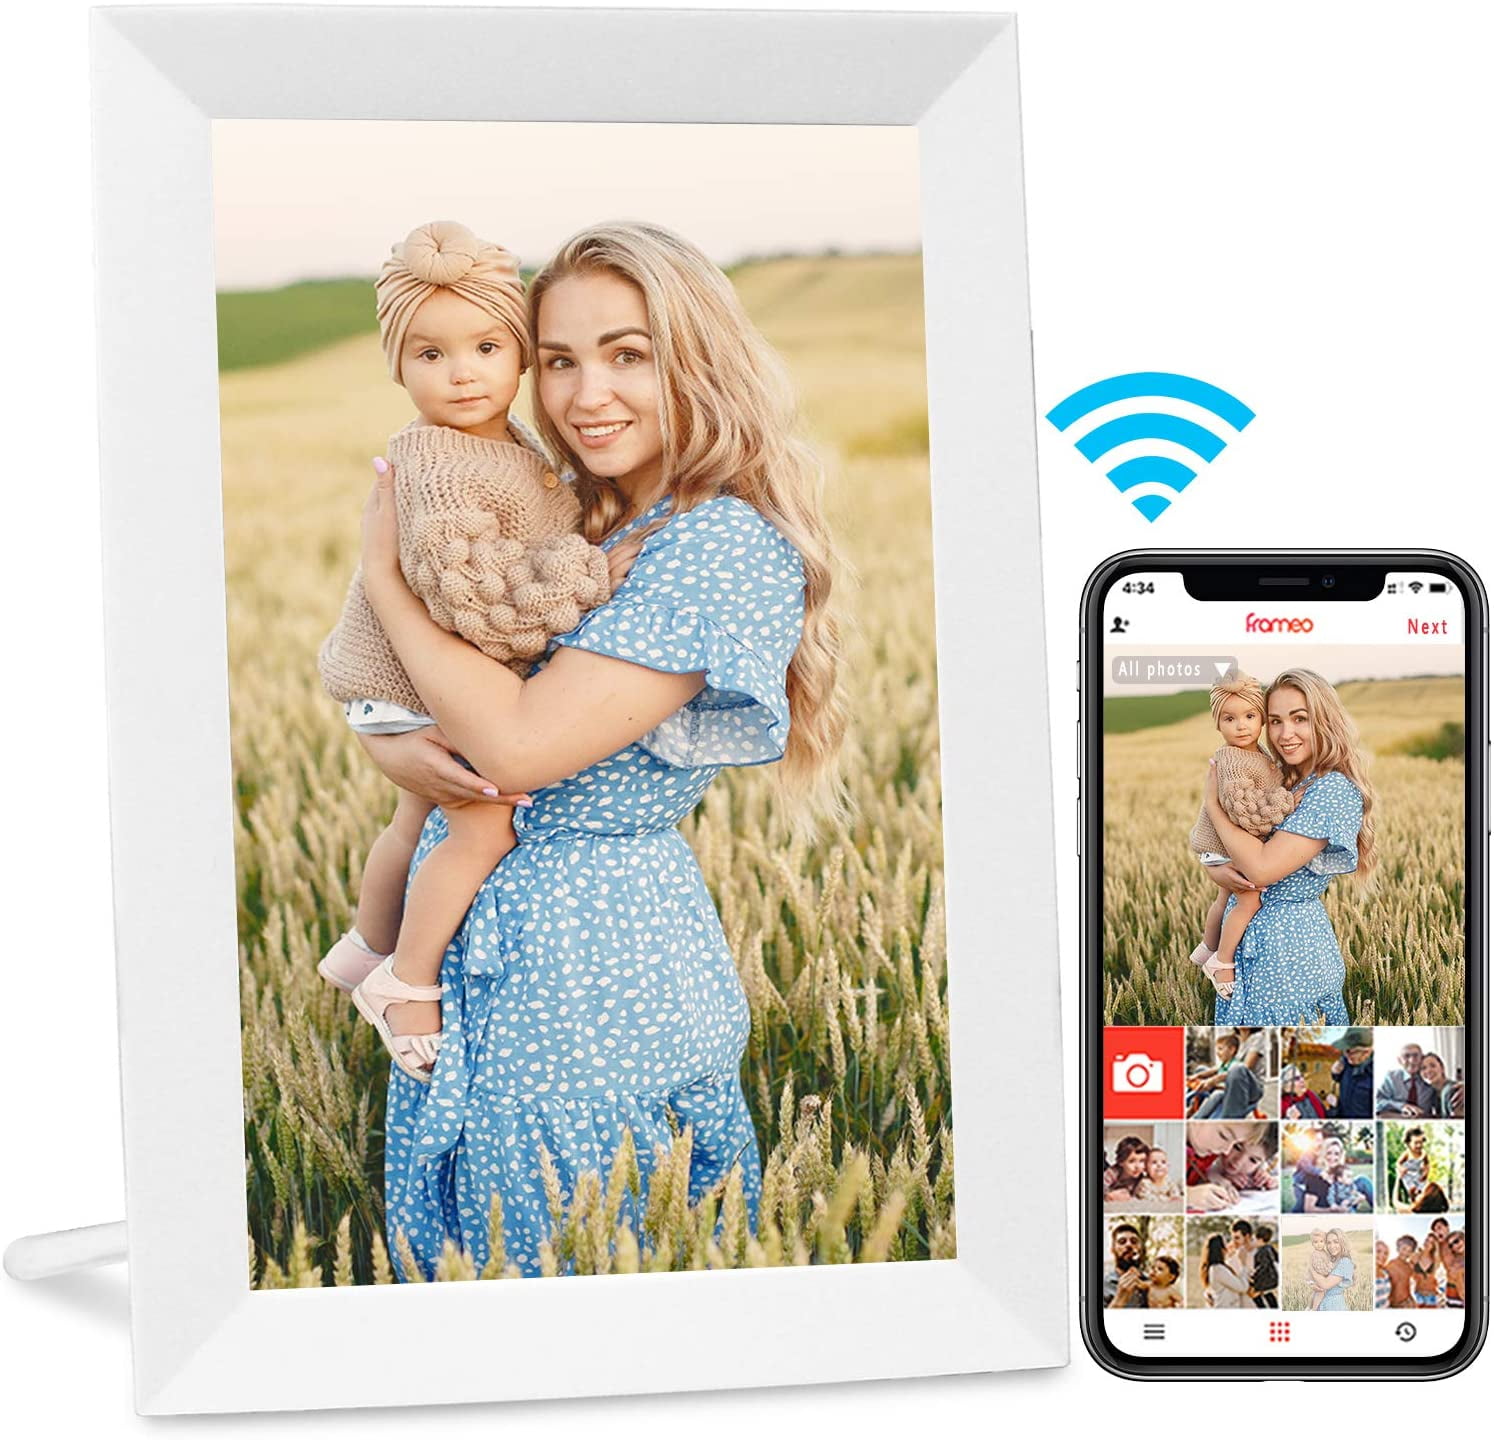 Arafuna 10.1 inch IPS Touch Screen Smart Electronic Photo Frame Share Photos or Videos via Free Frameo APP Auto-Rotate 16GB Storage Digital Picture Frame WiFi Digital Photo Frame 